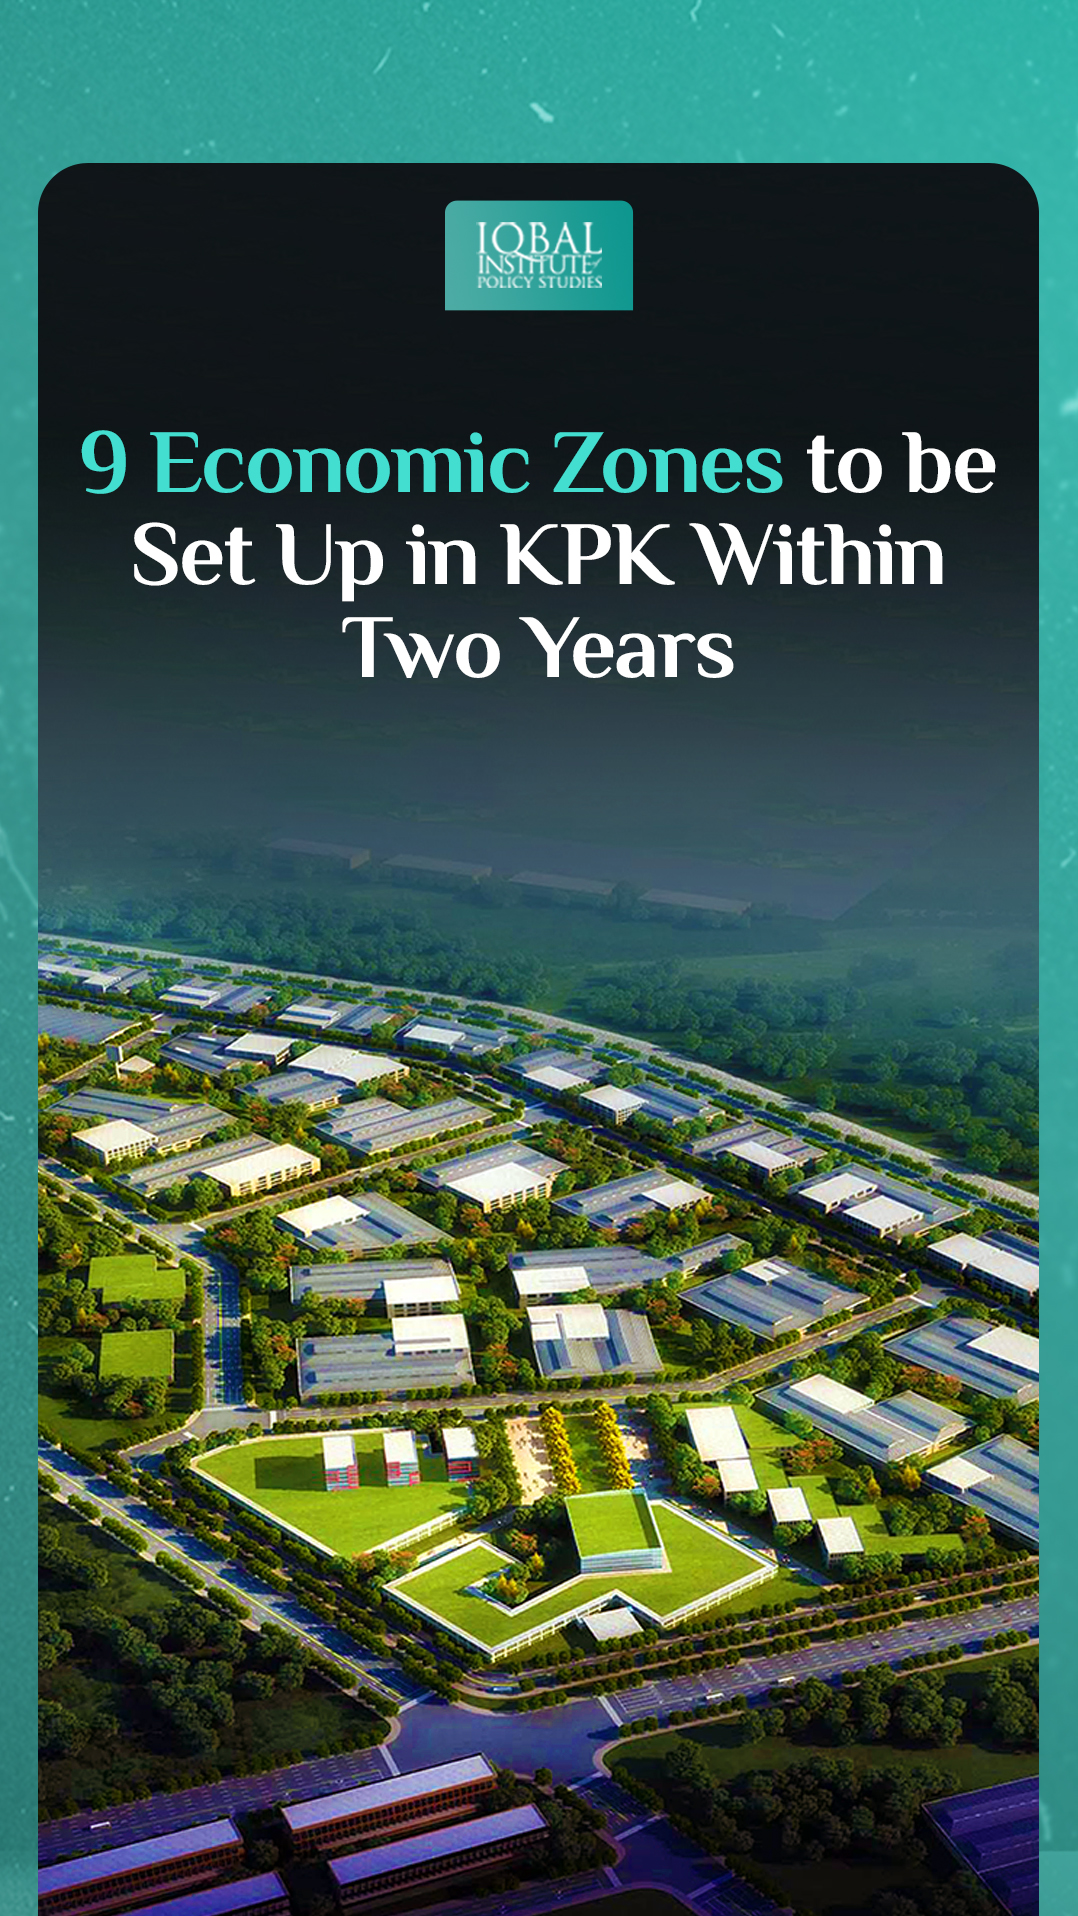 9 Economic Zones to be set up in KPK within two years